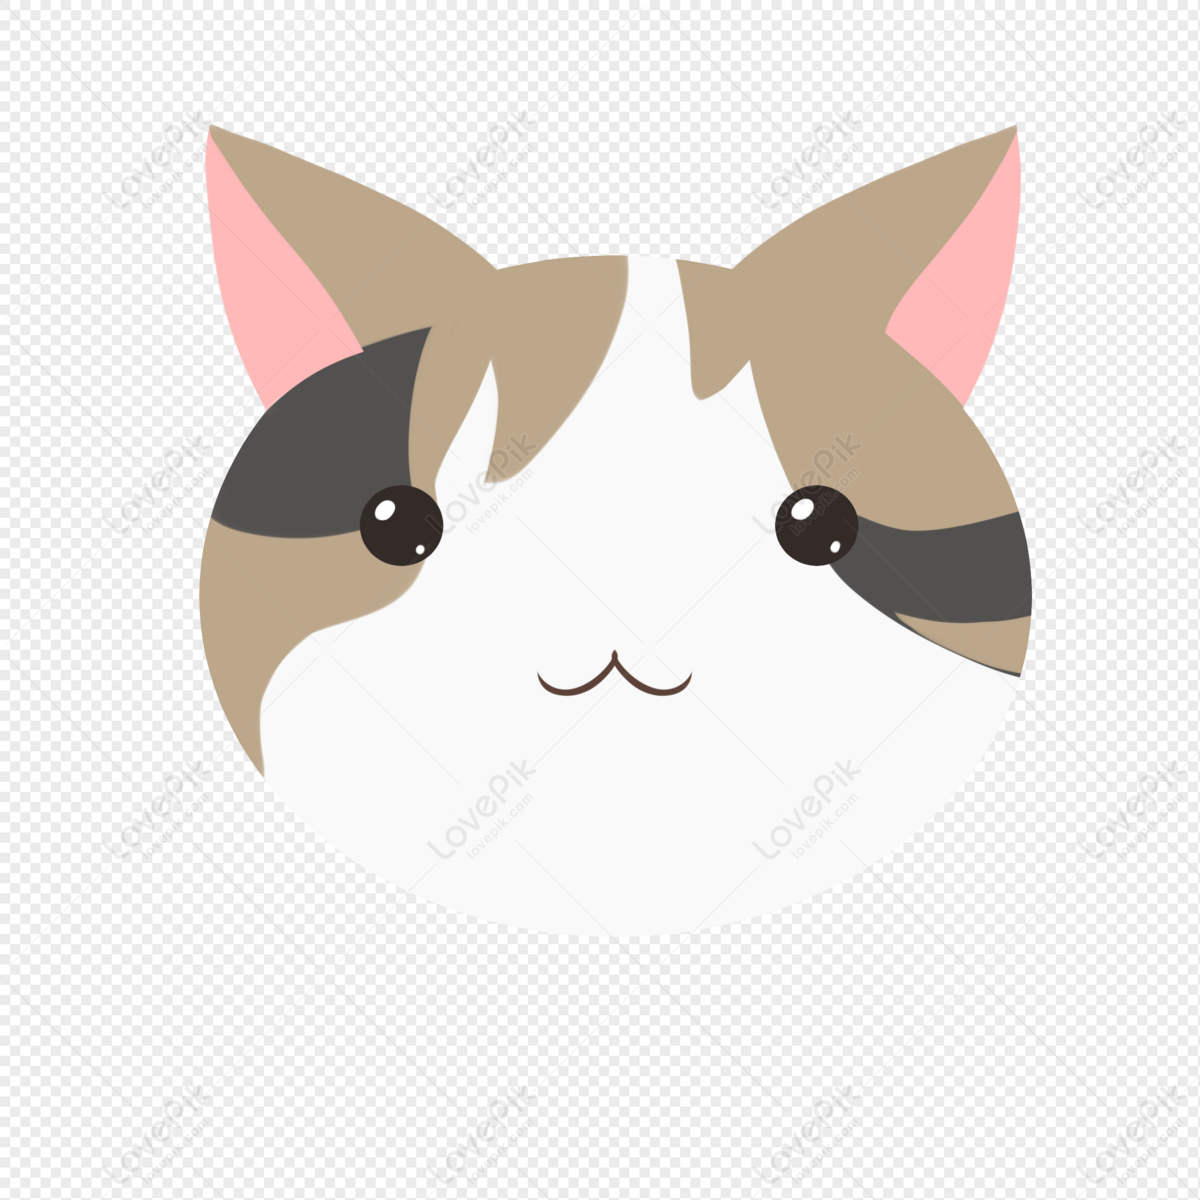 British Shorthair Cat PNG Images With Transparent Background | Free ...